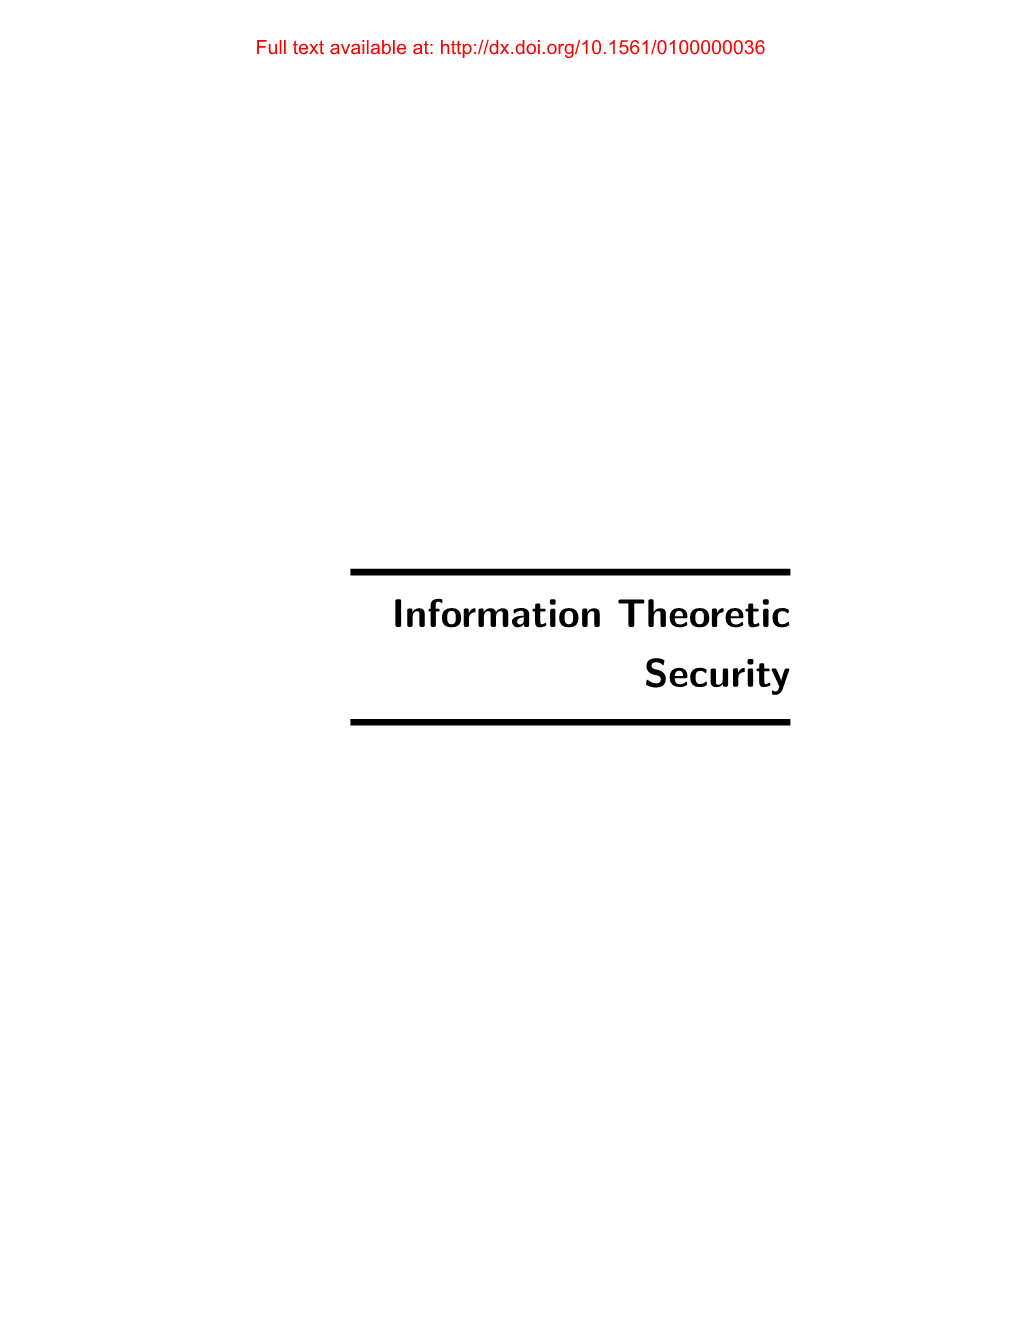 Information Theoretic Security Full Text Available At